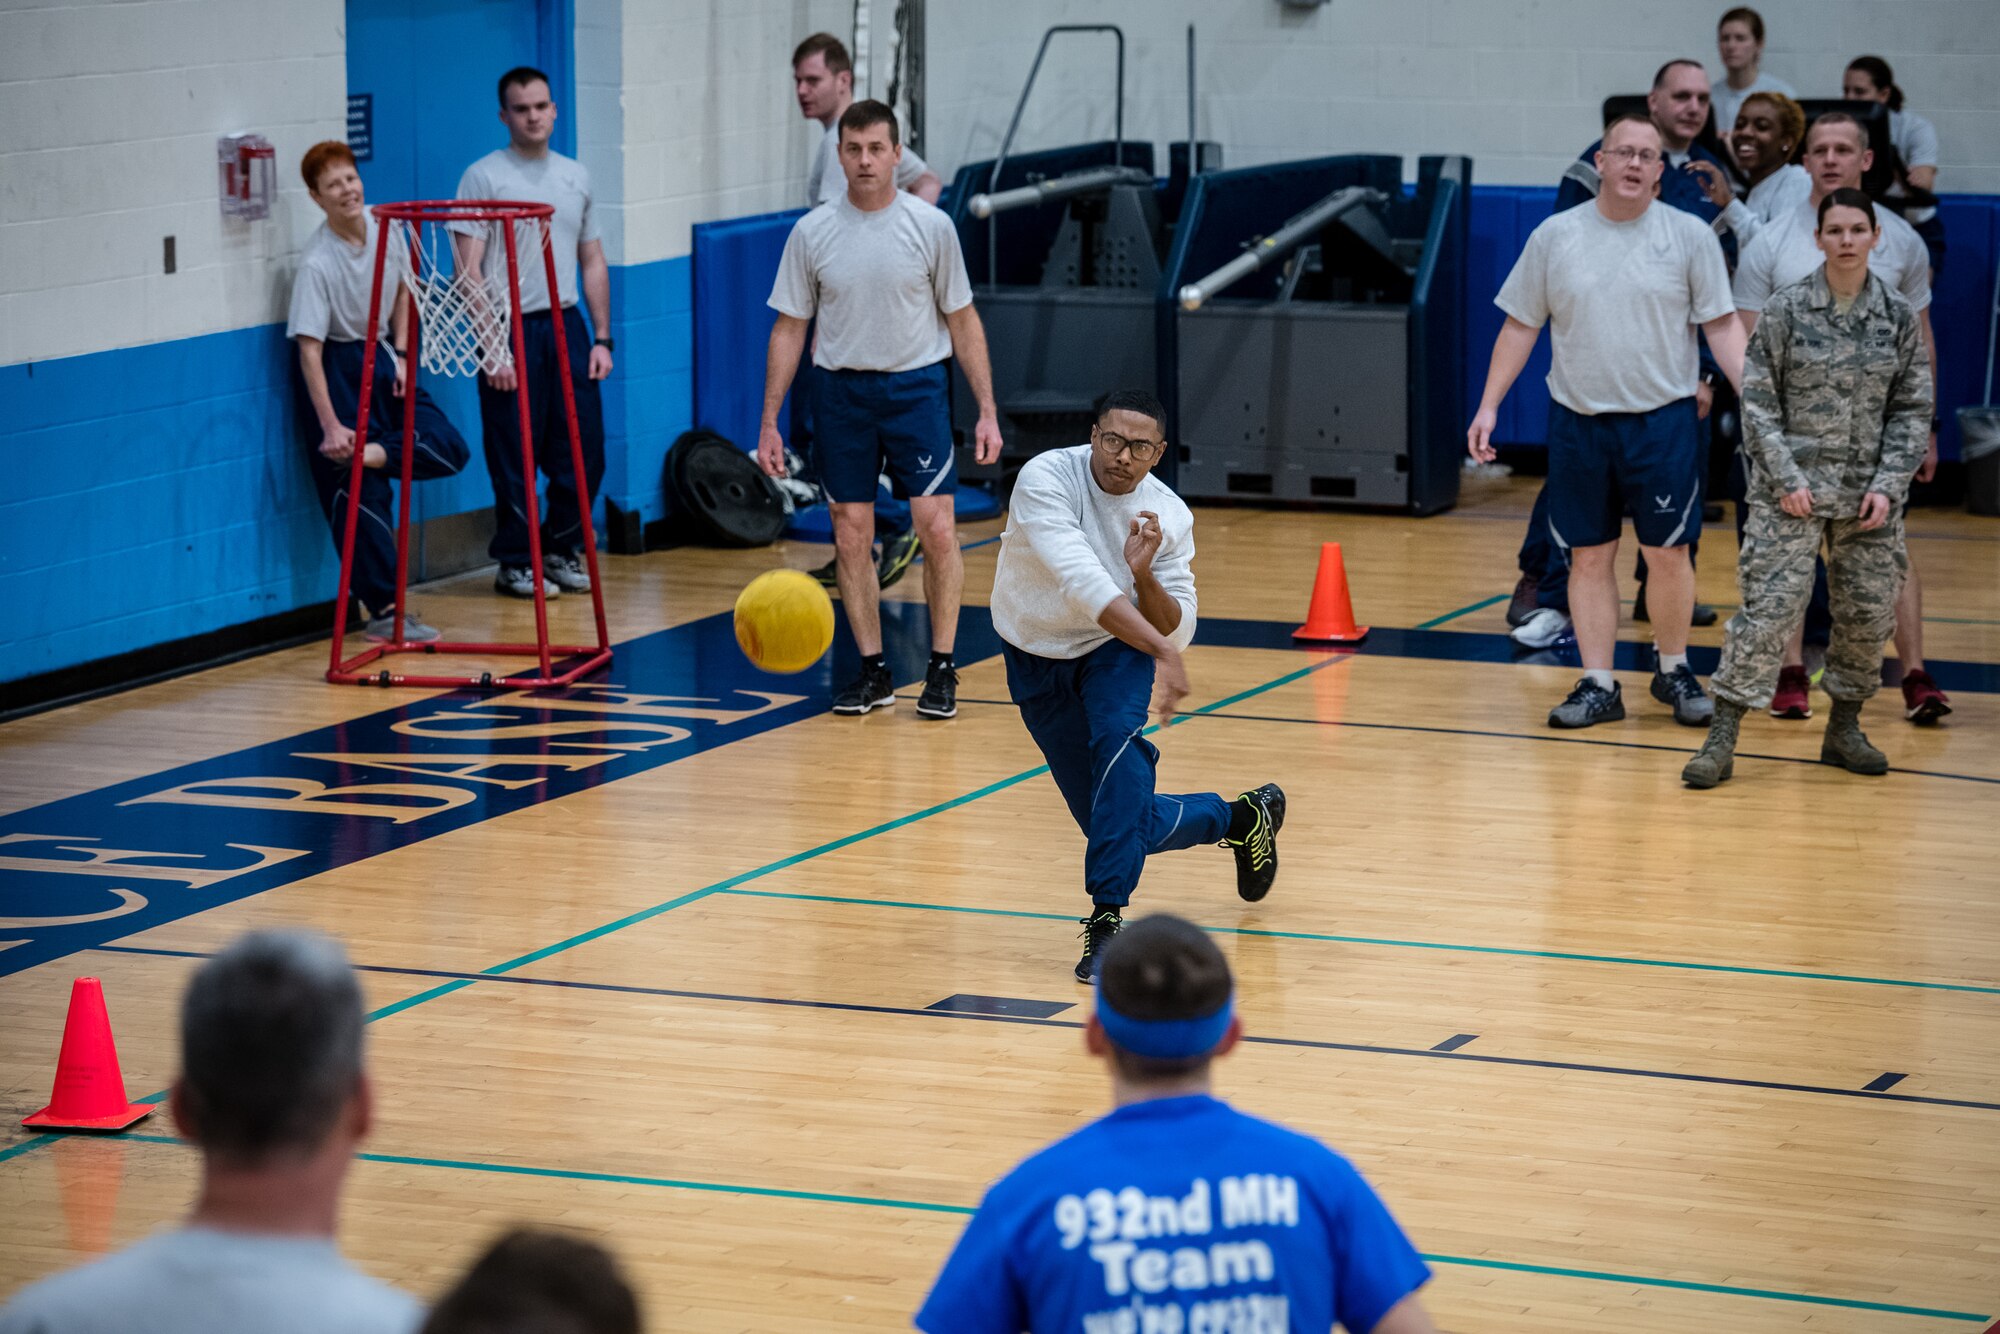 Citizen Airmen with the 932nd Medical Group join in some team building dodgeball during a resiliency pause February 9, 2020 Scott Air Force Base, Illinois. The intent of the planned pause is to give leadership and Airmen a chance to bond and create some camaraderie. (U.S. Air Force photo by Master Sgt. Christopher Parr)